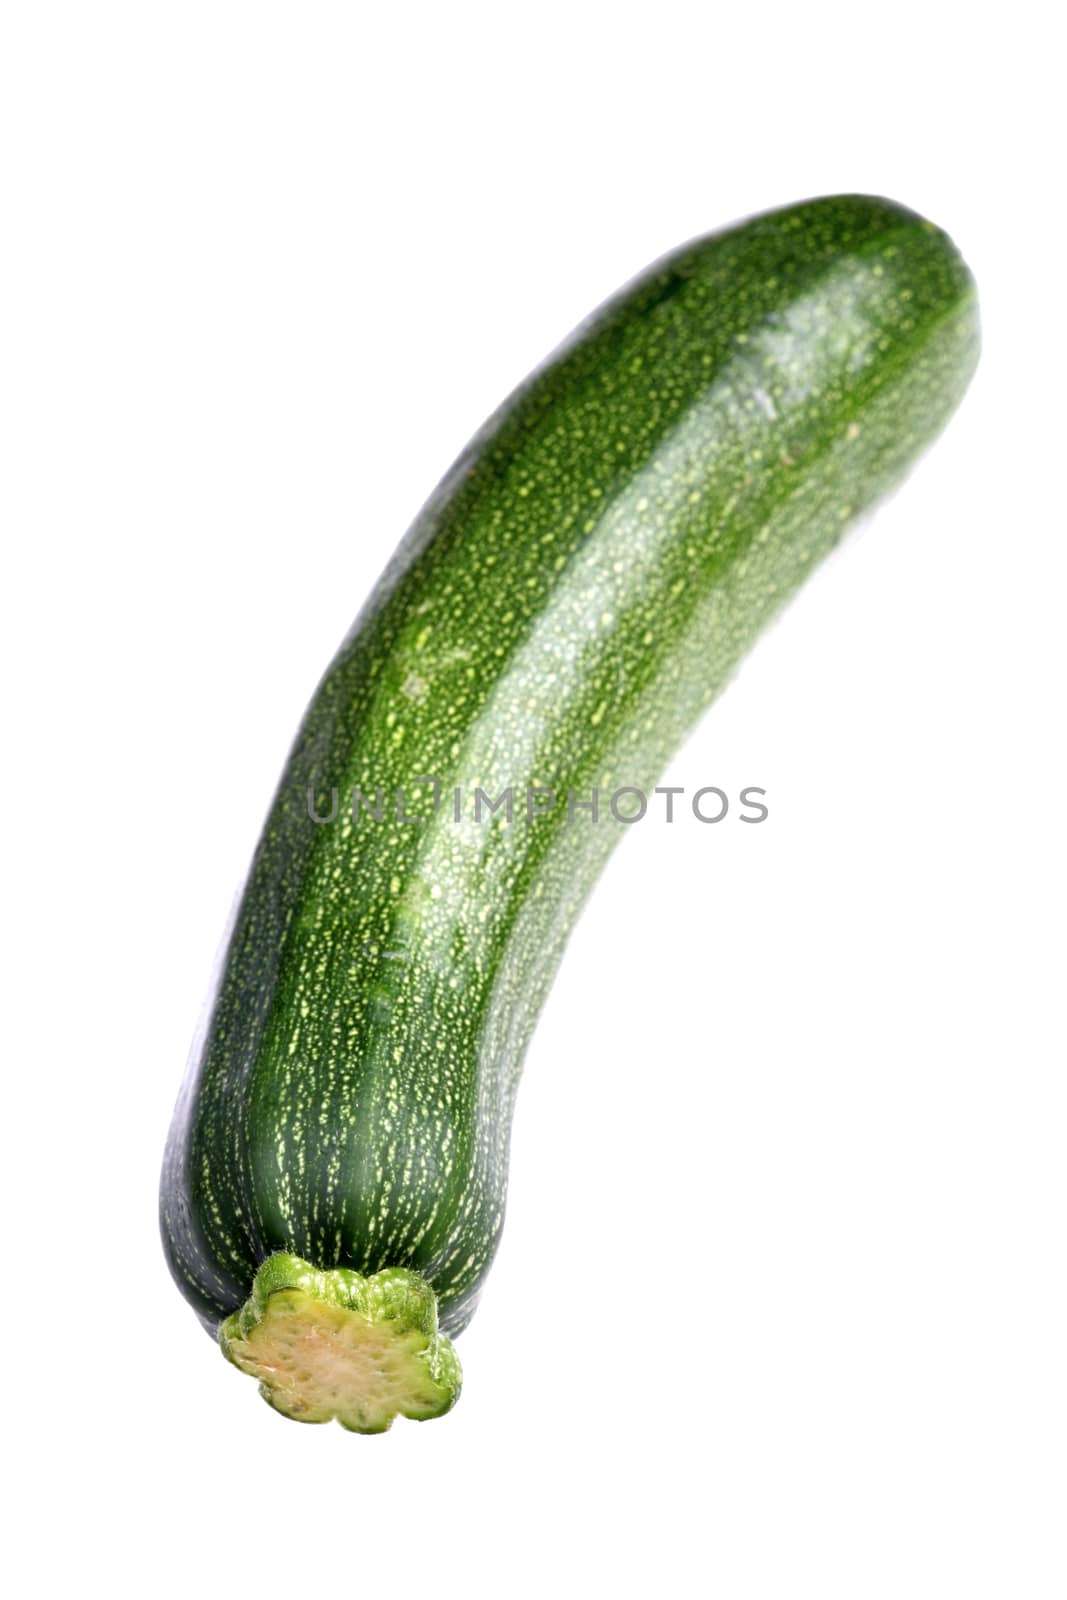 Single Raw Courgette